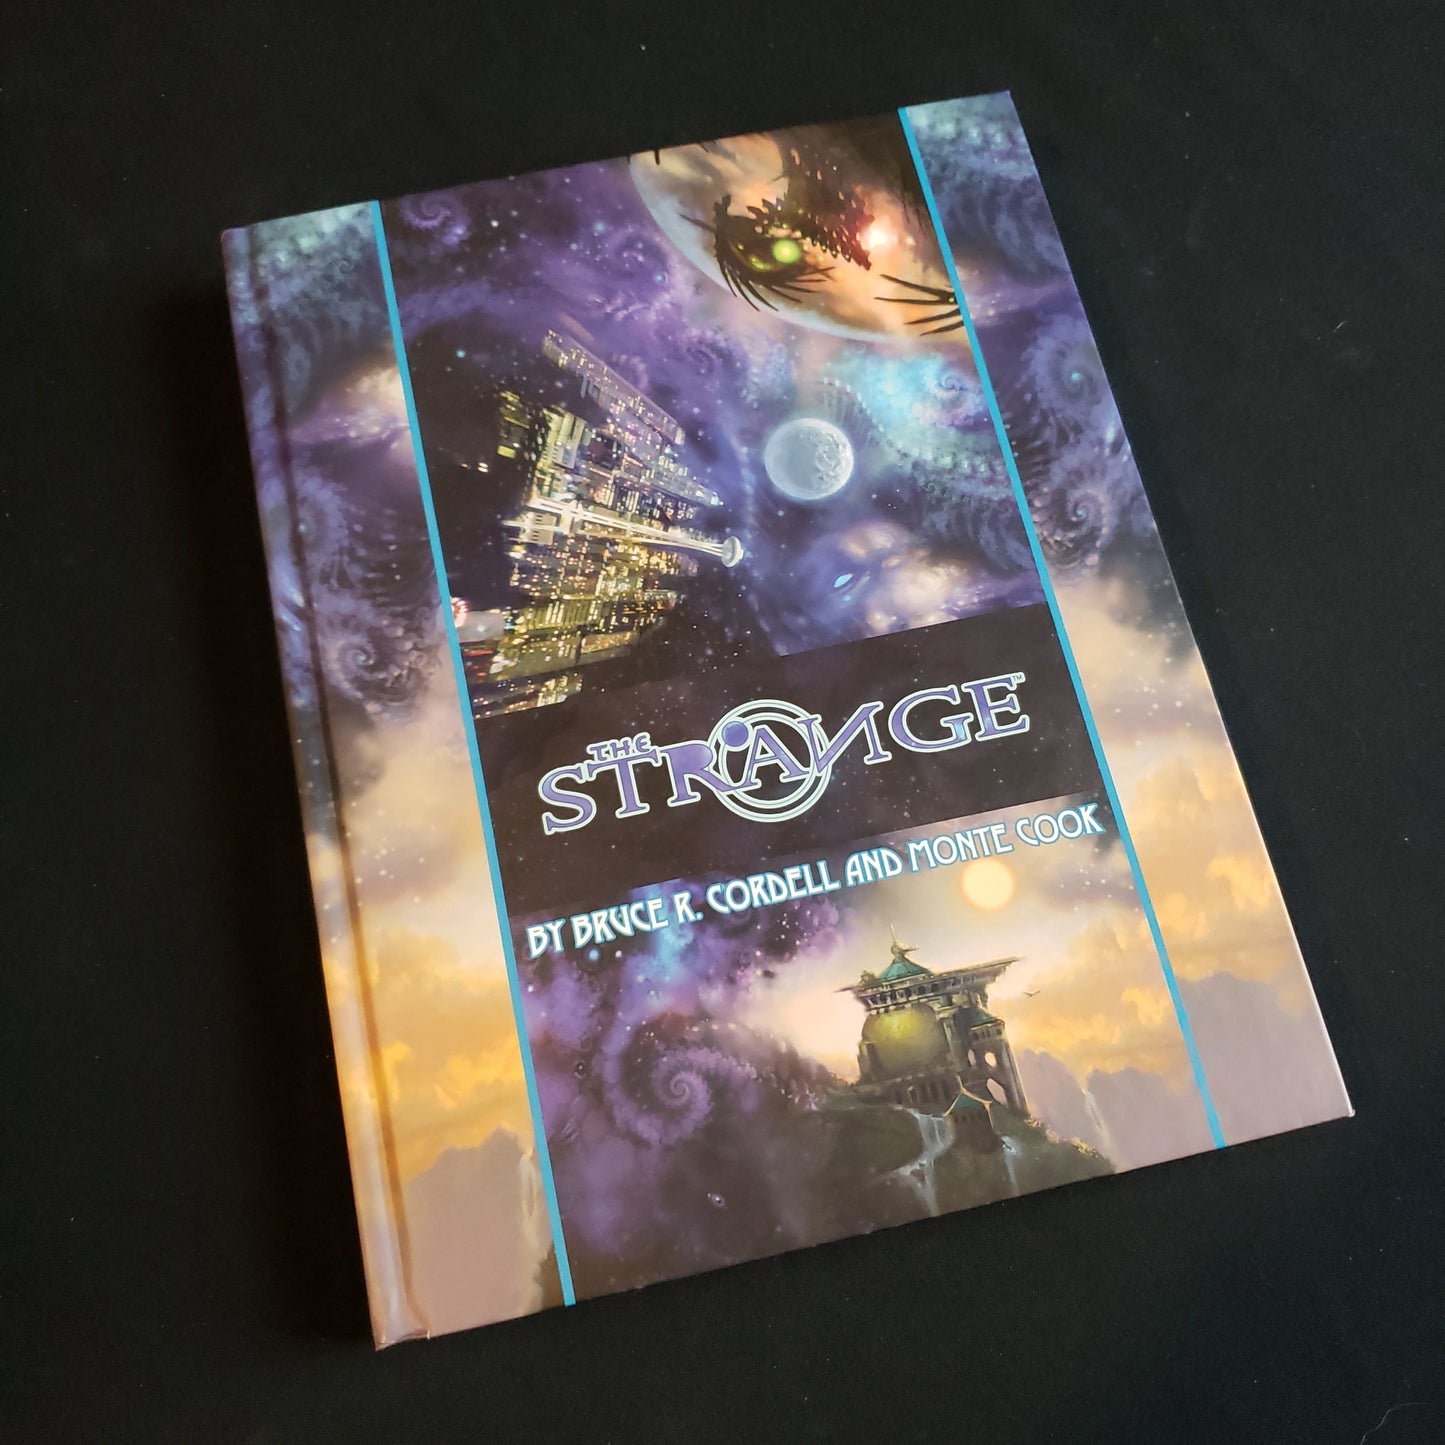 Image shows the front cover of The Strange roleplaying game book